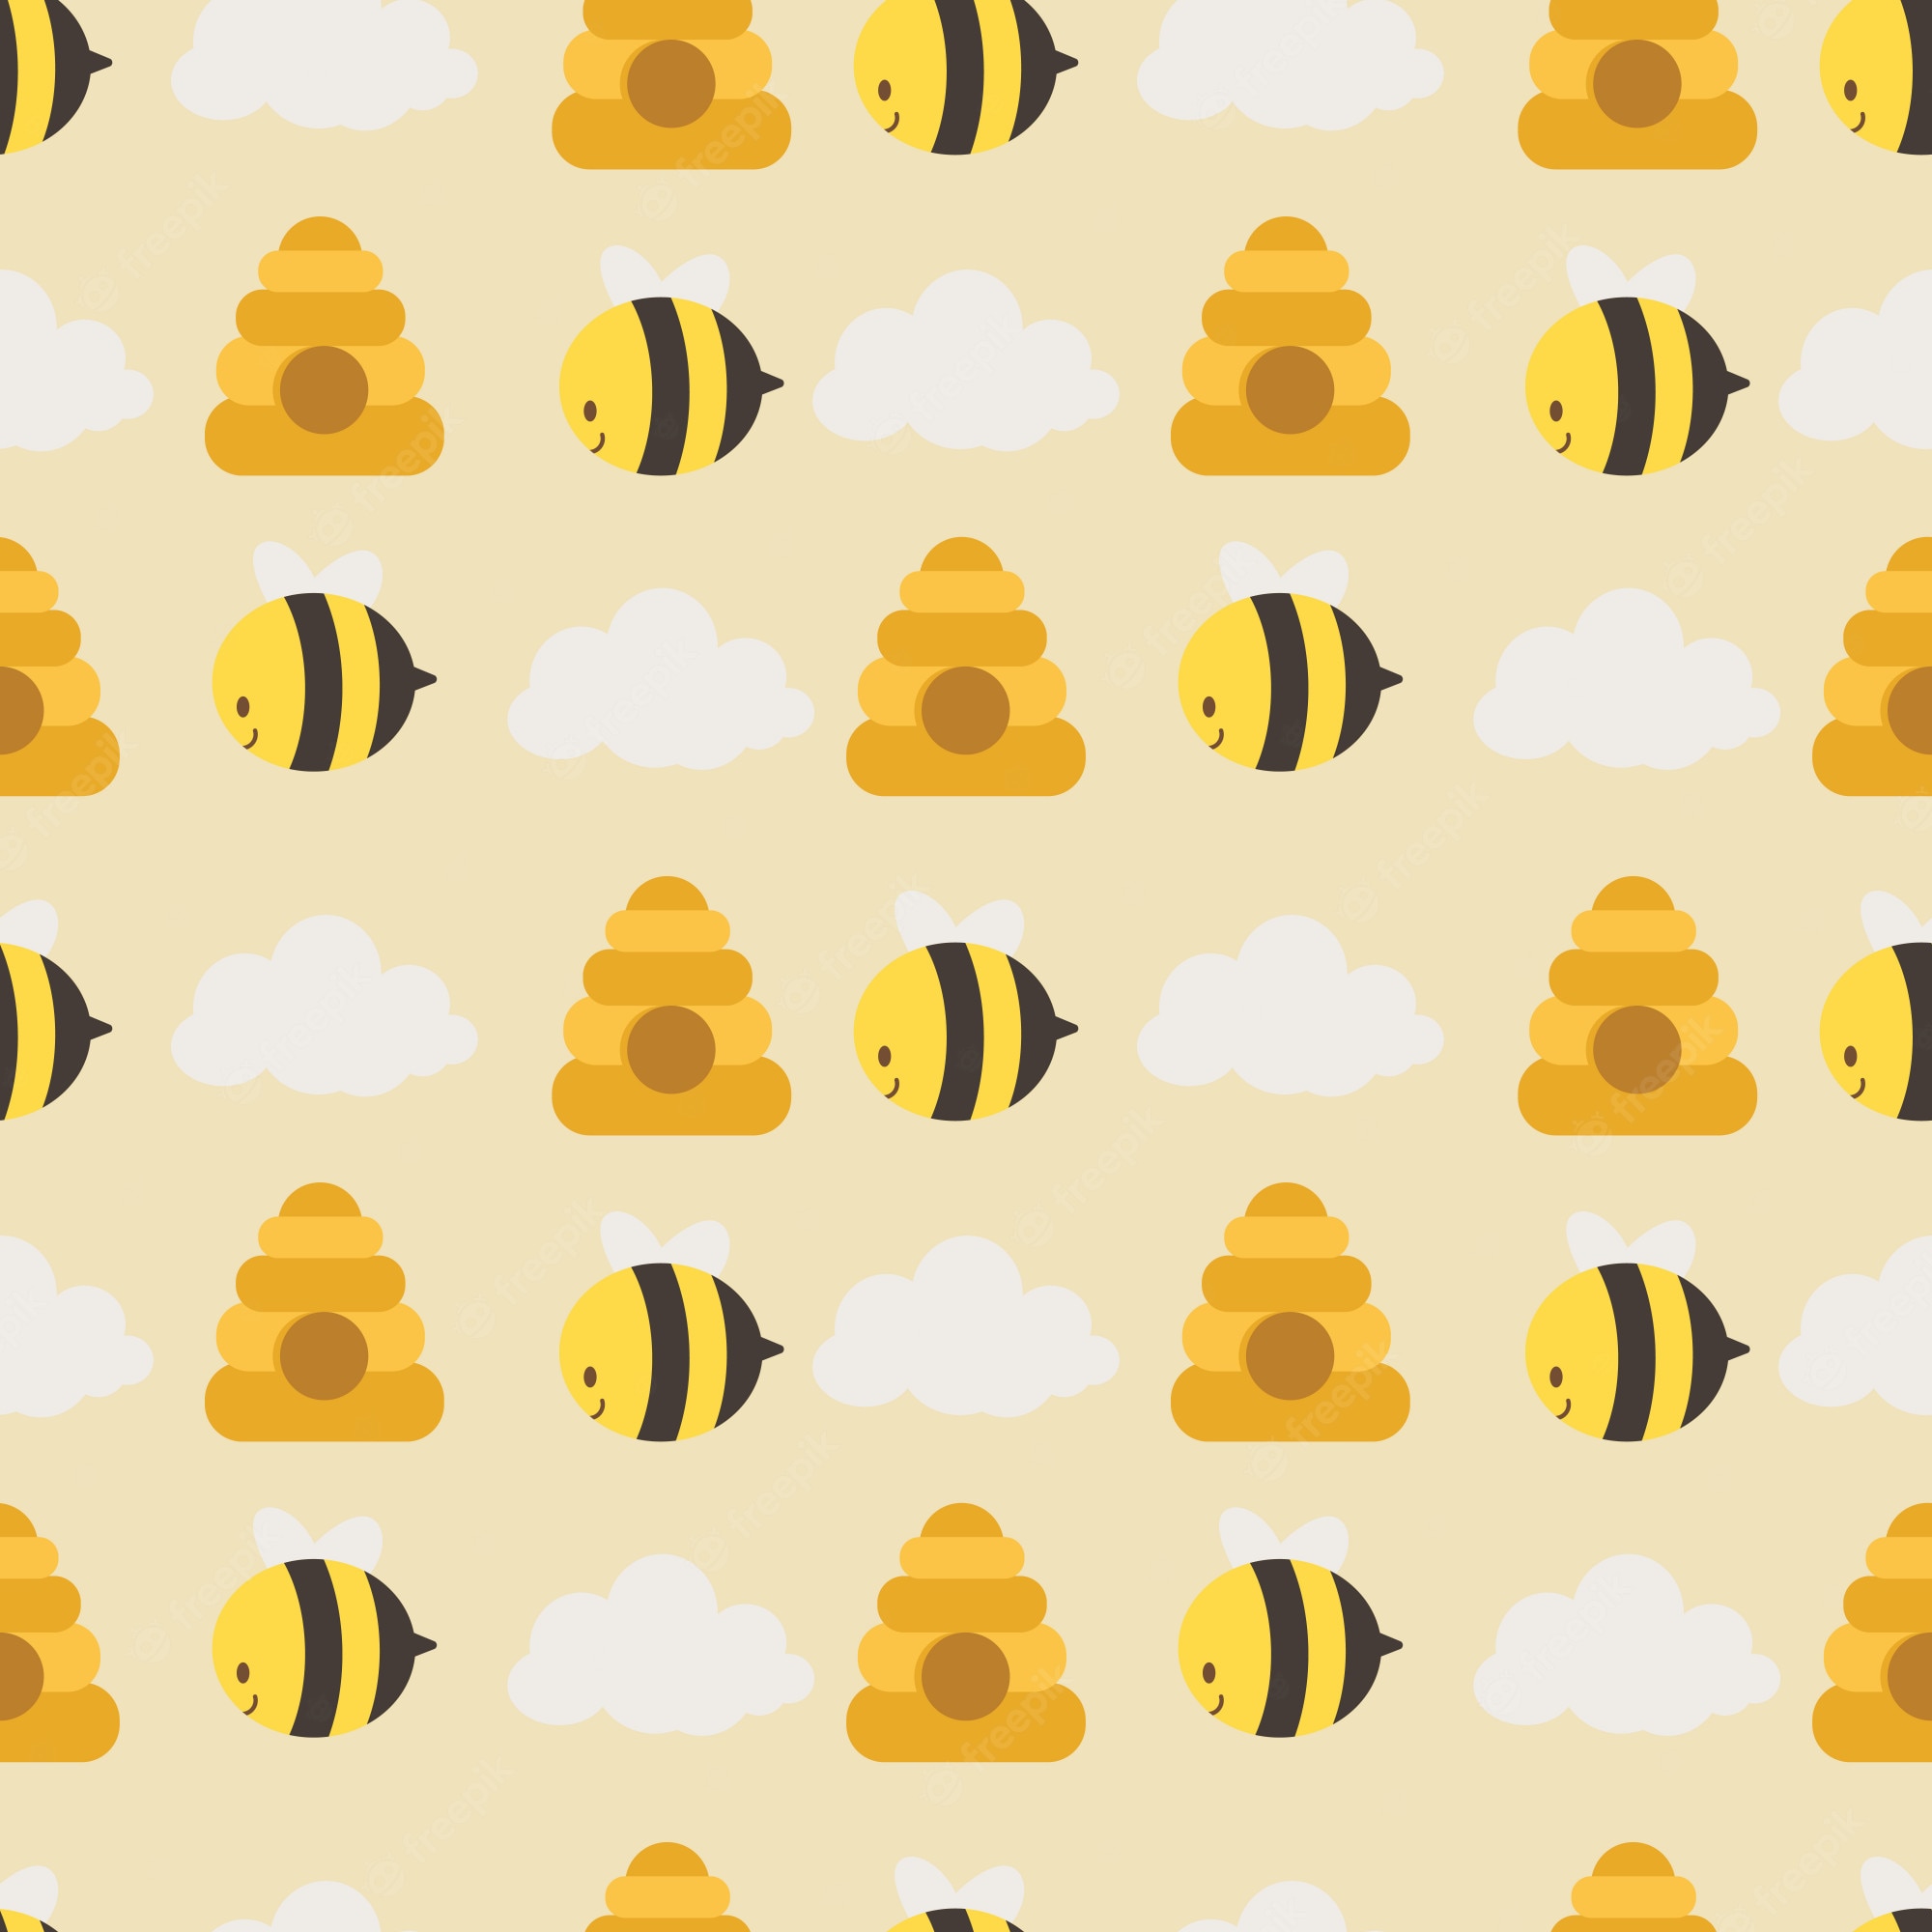 Bee pattern Vectors & Illustrations for Free Download